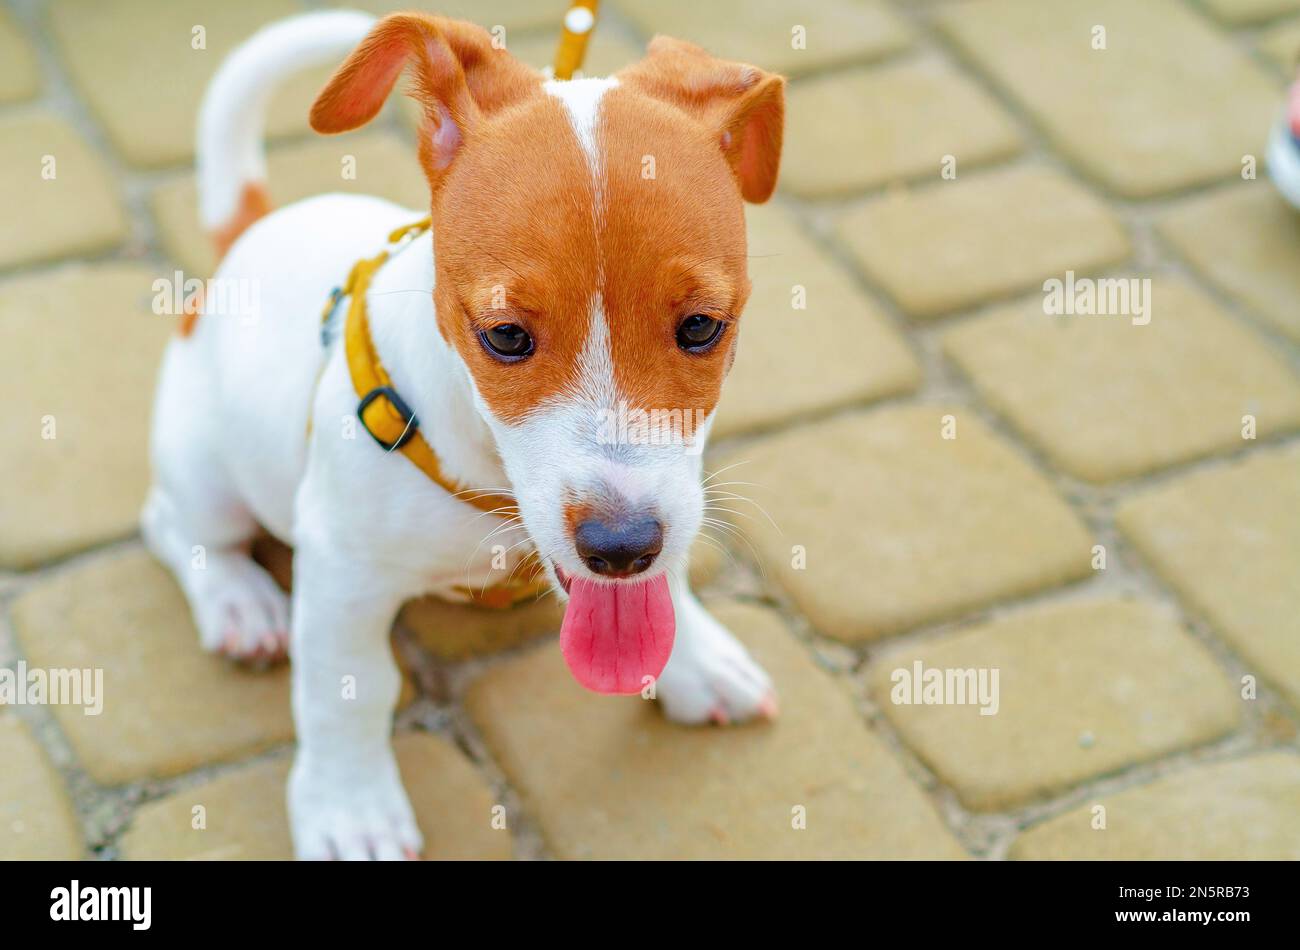 Small dog with cheerful and gentle expression is sitting on cobblestone. Emotions of domestic animals. Stock Photo